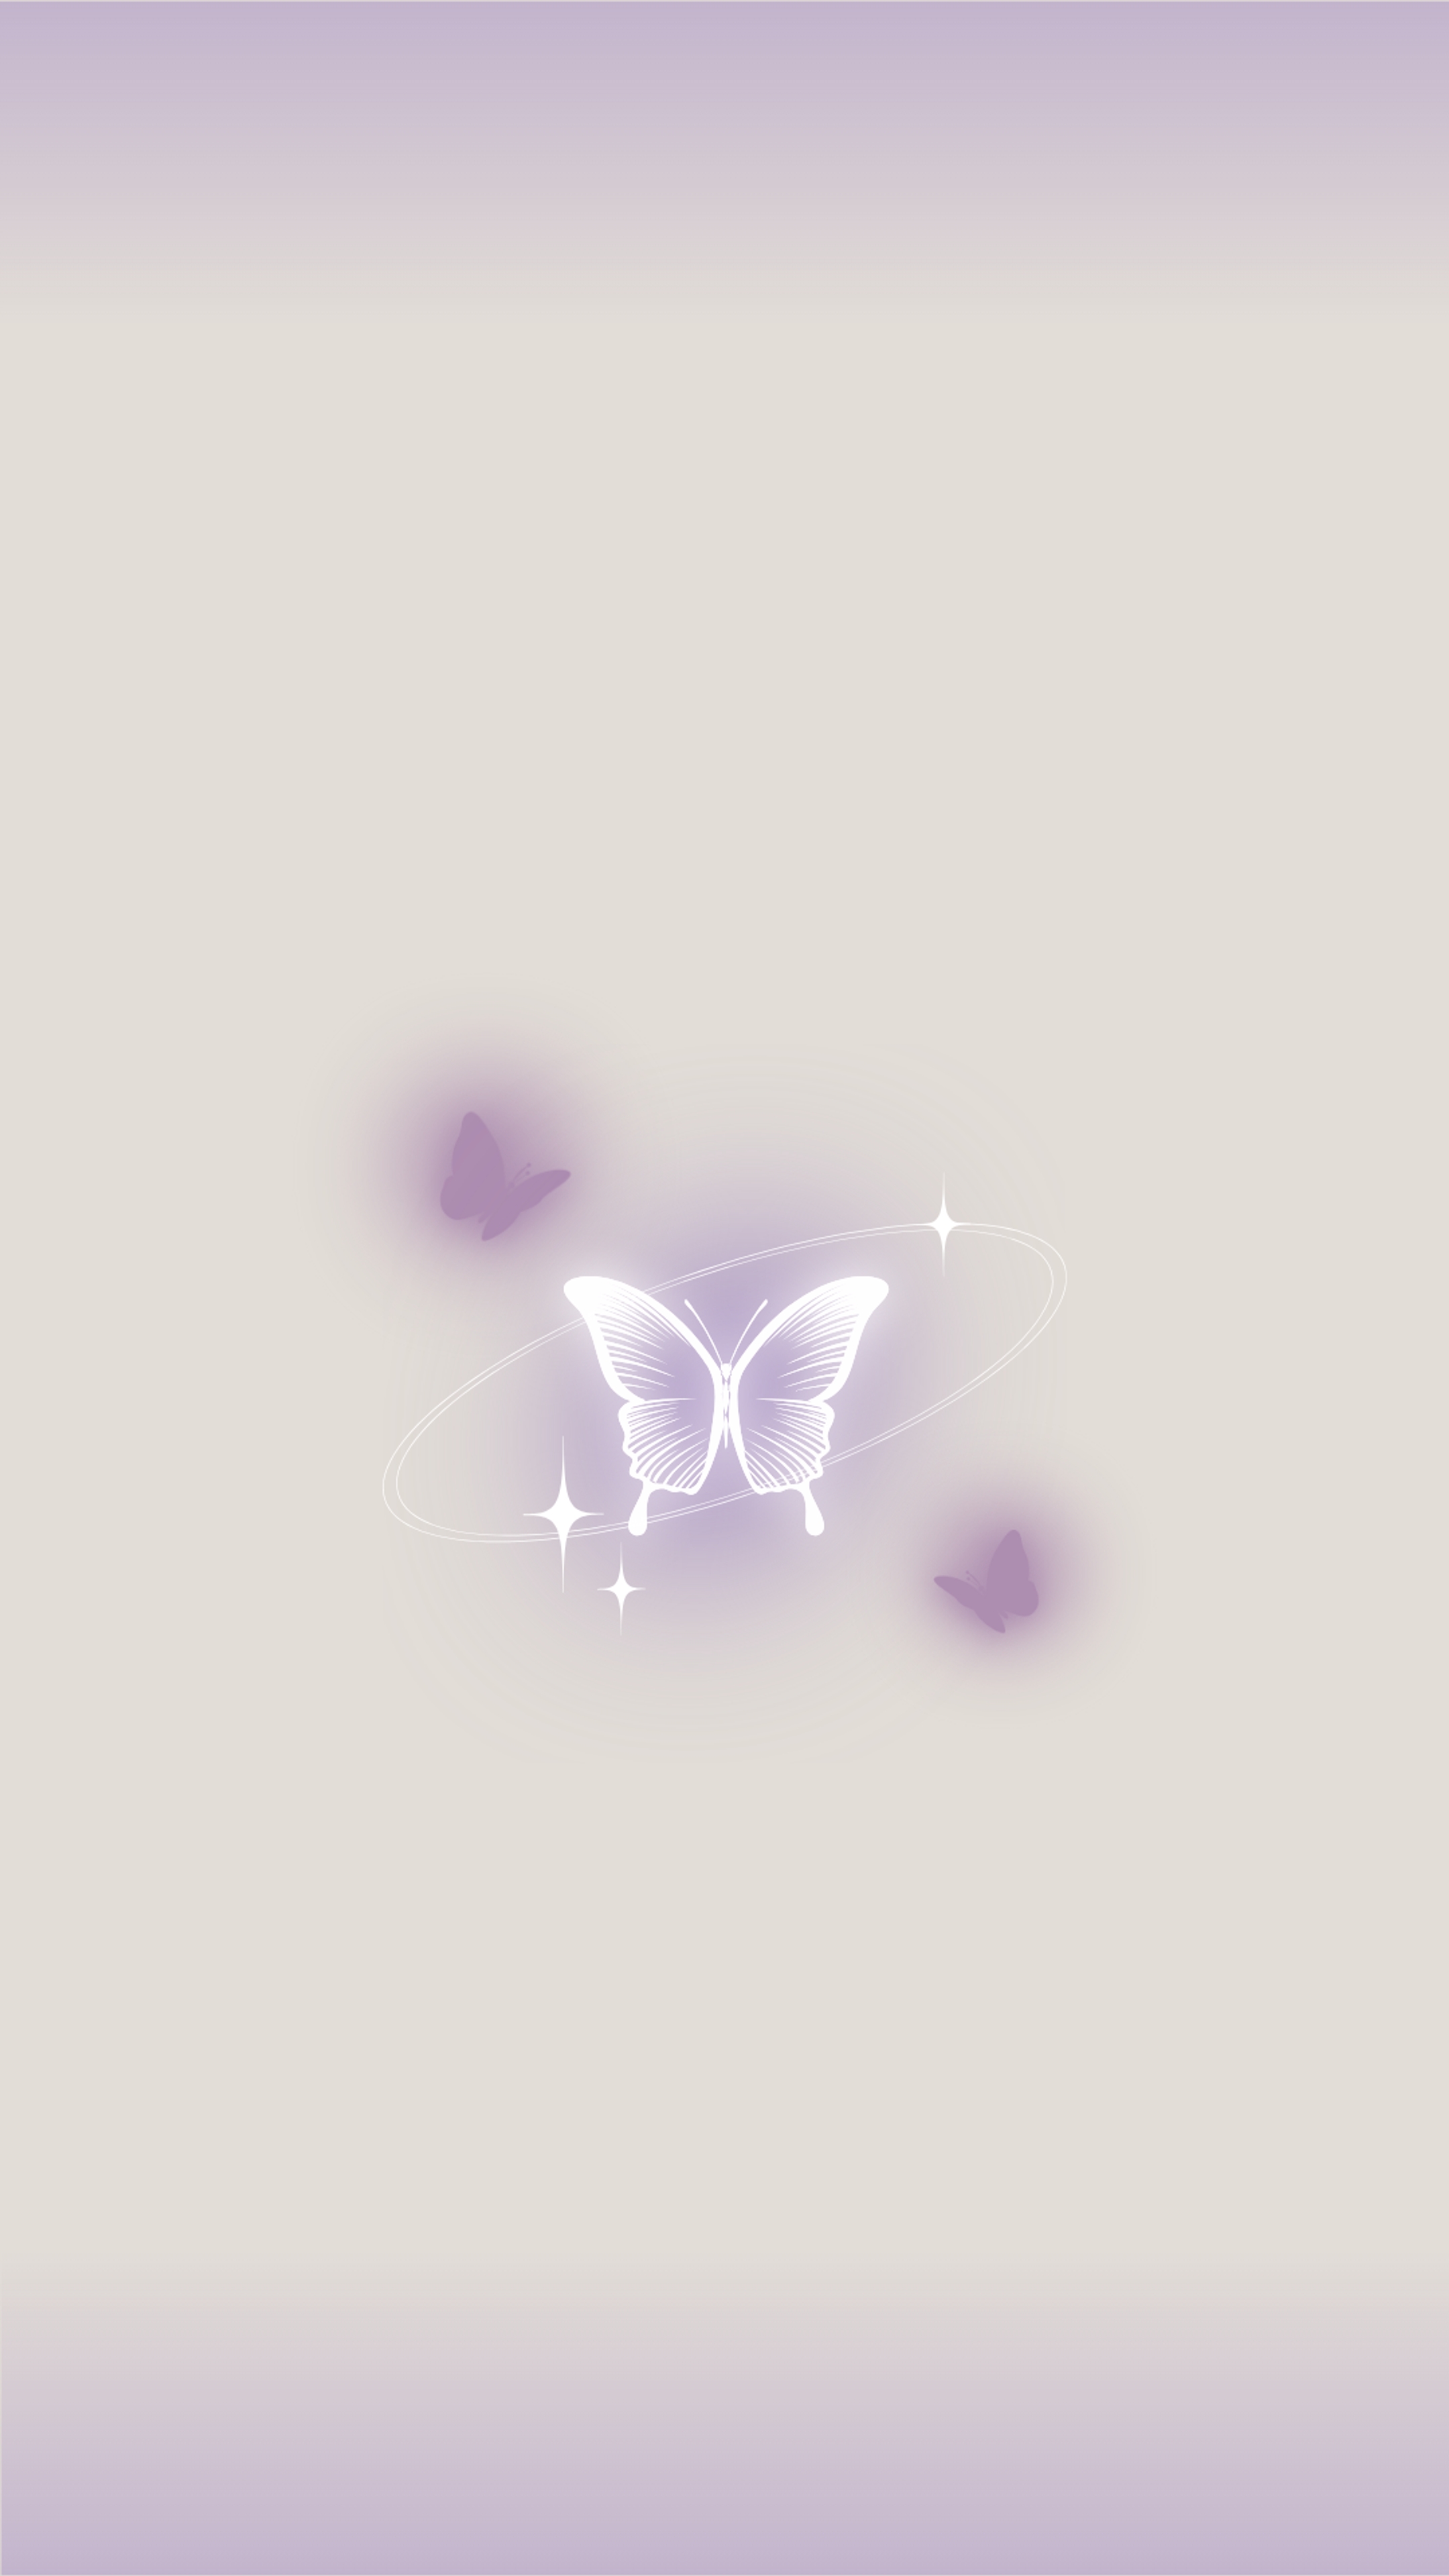 Shimmering Purple Butterflies on Soft Beige Background Kertas dinding[c2a86703d1a24467afd0]